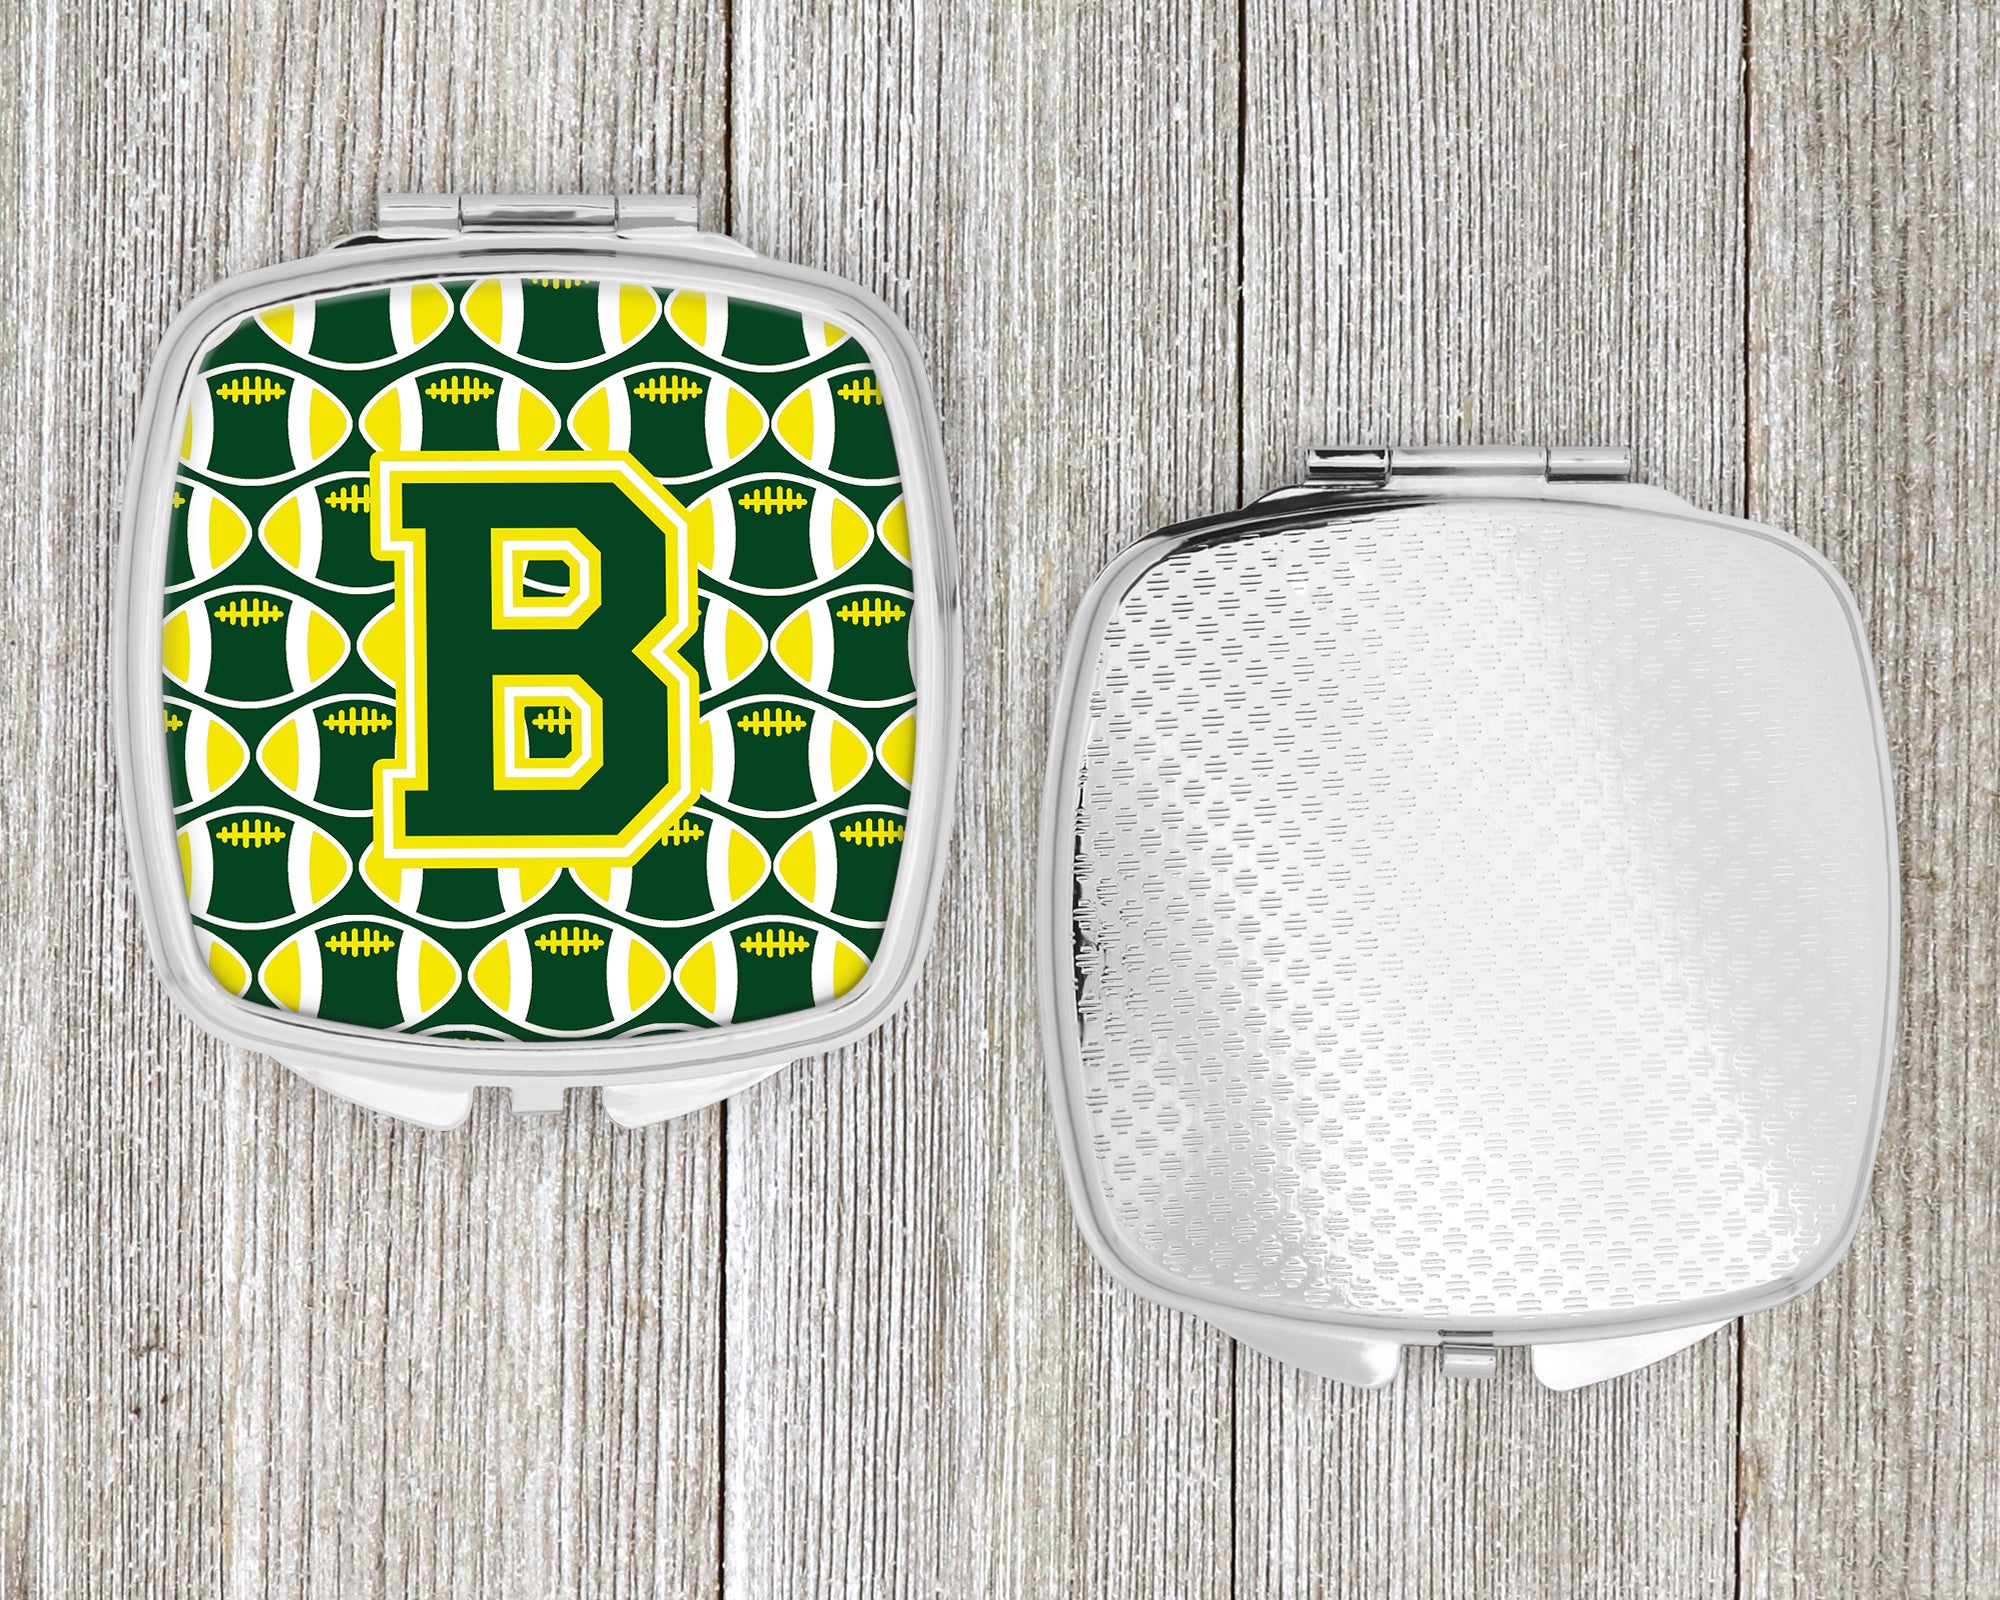 Letter B Football Green and Yellow Compact Mirror CJ1075-BSCM